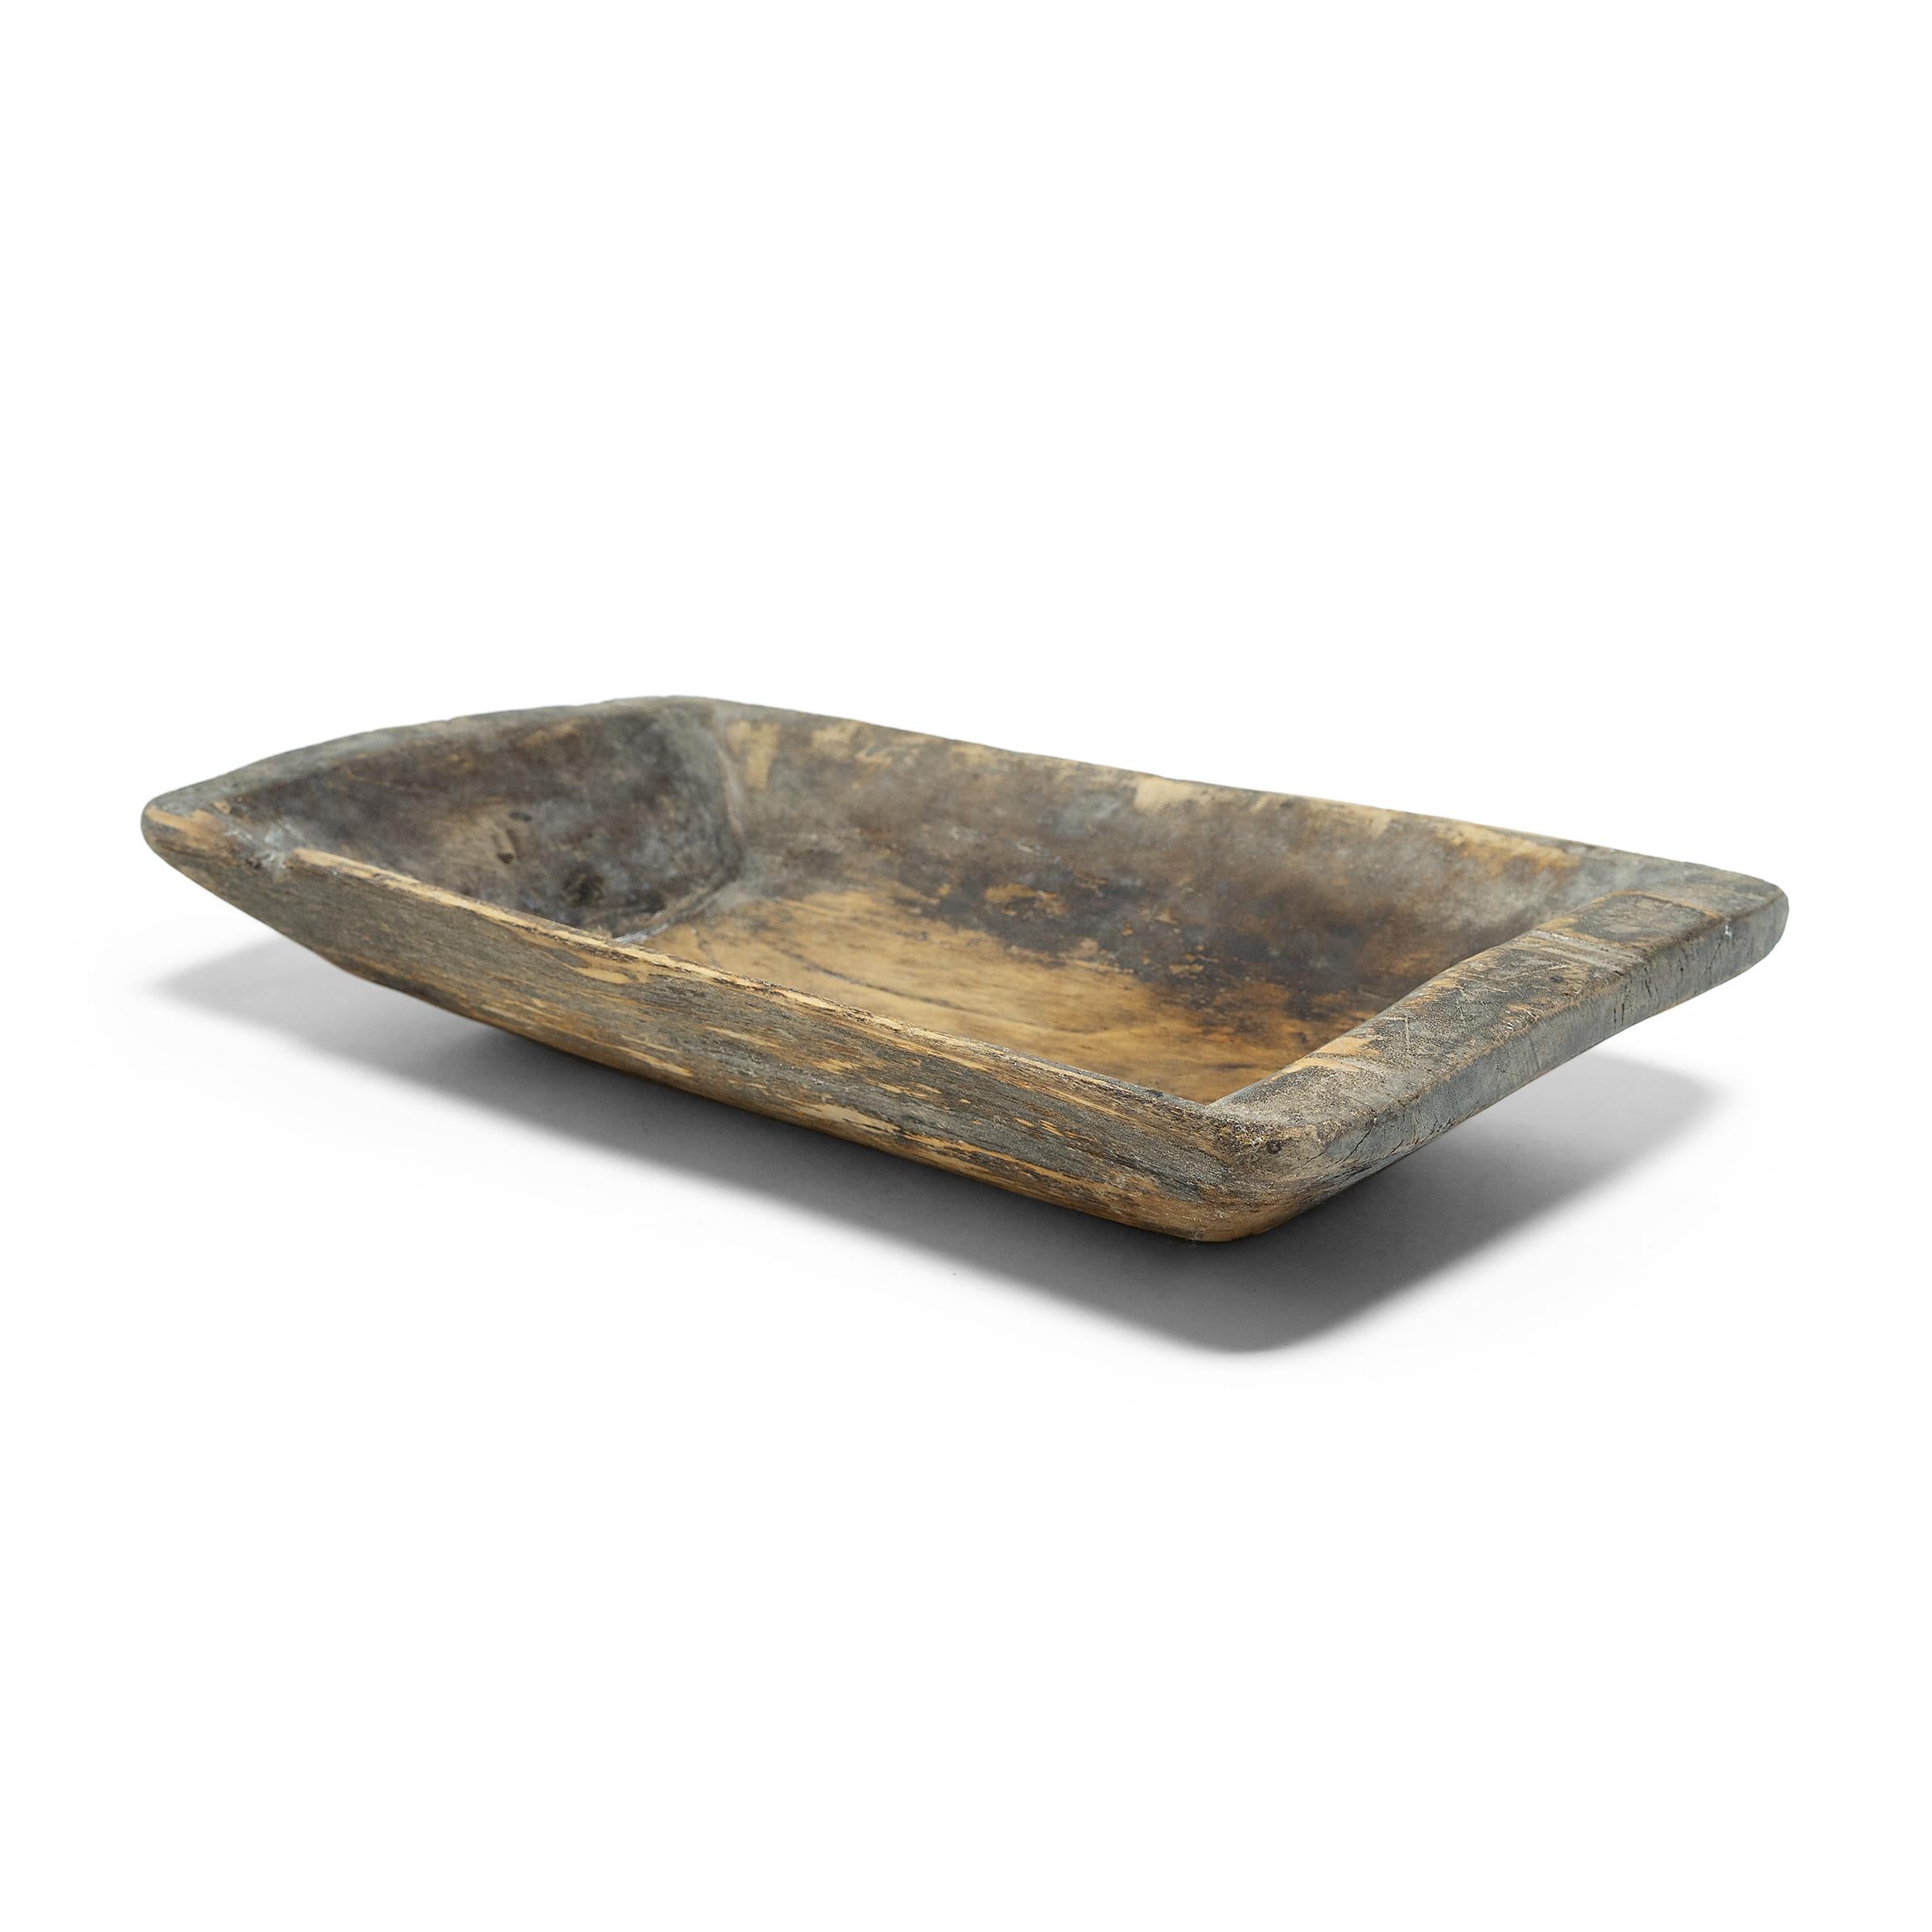 This wooden farm tray from northern China charms with its rustic finish and asymmetrical form. Hand-carved from a single block of wood, the large tray is truly one-of-a-kind, shaped with tapered sides and a shallow interior basin. Years of use have